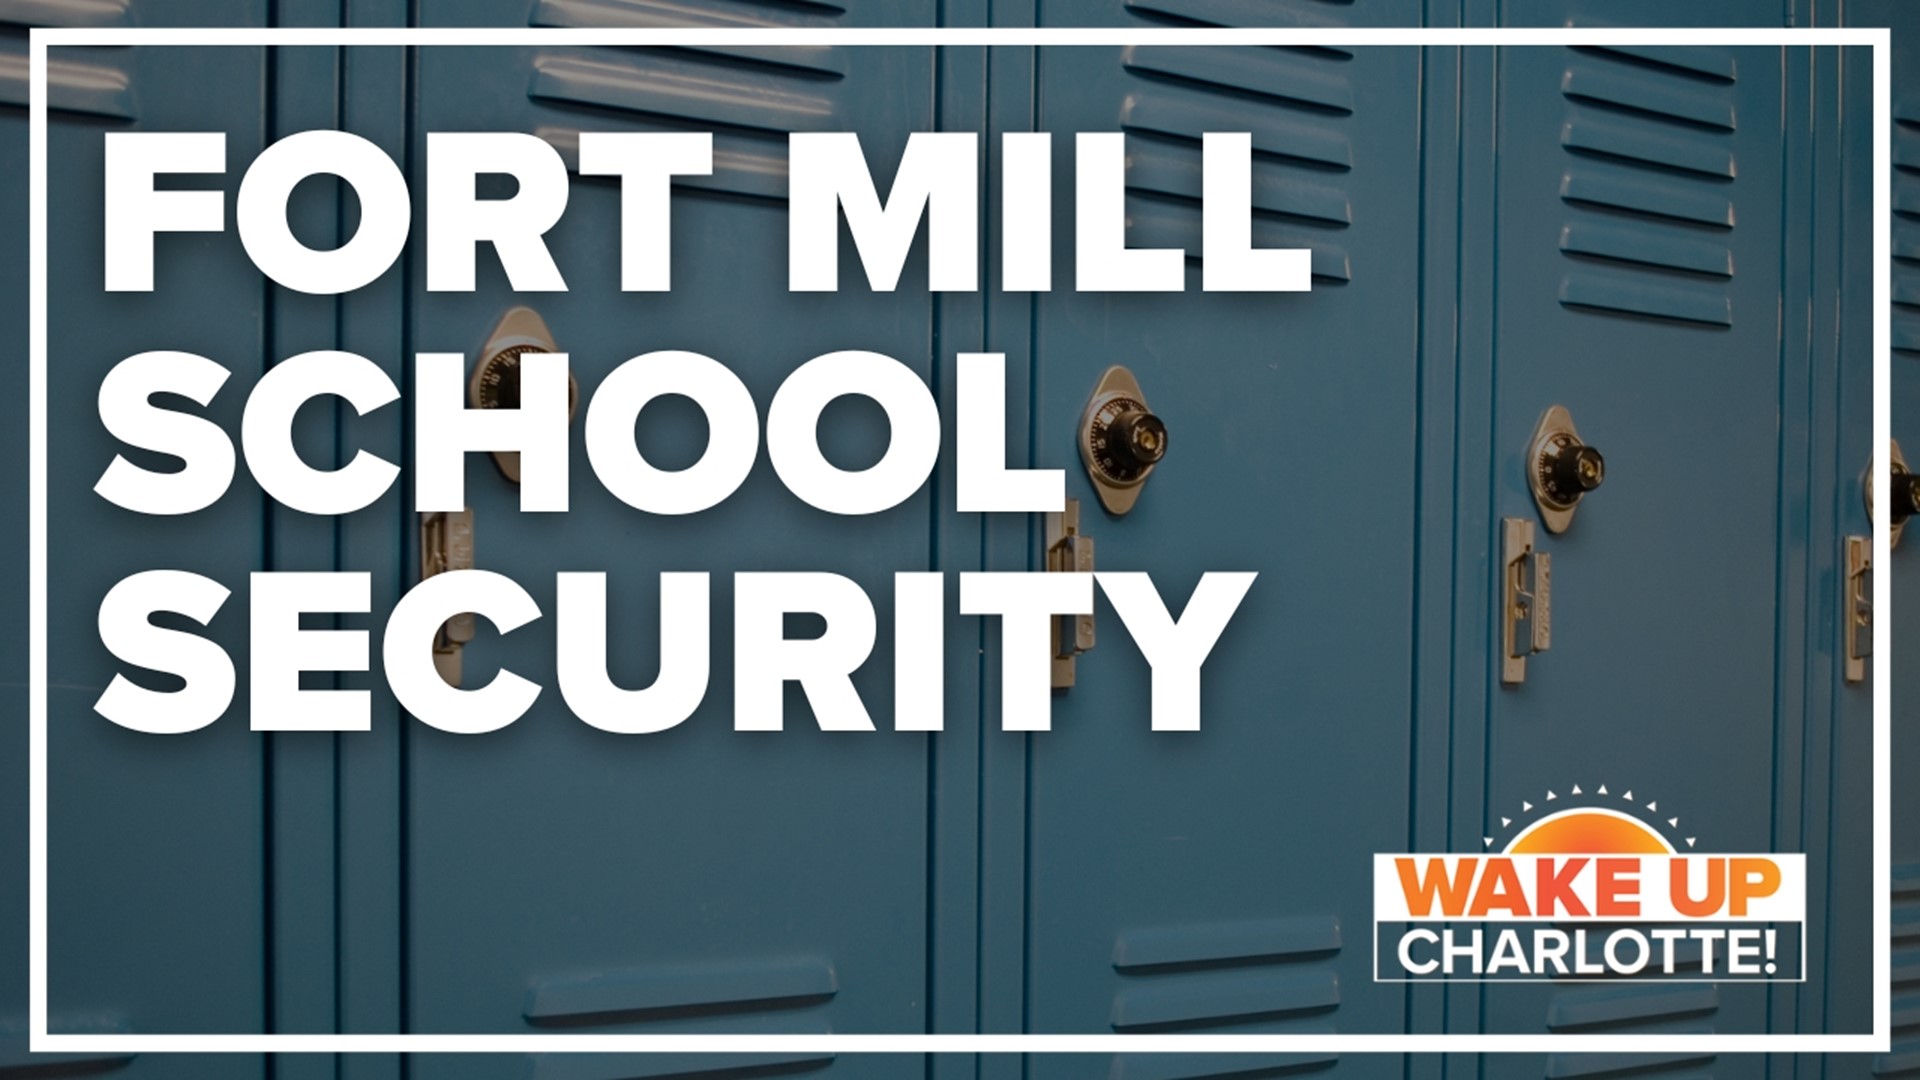 The district is implementing new safety measures as well as a new program to deal with school threats.